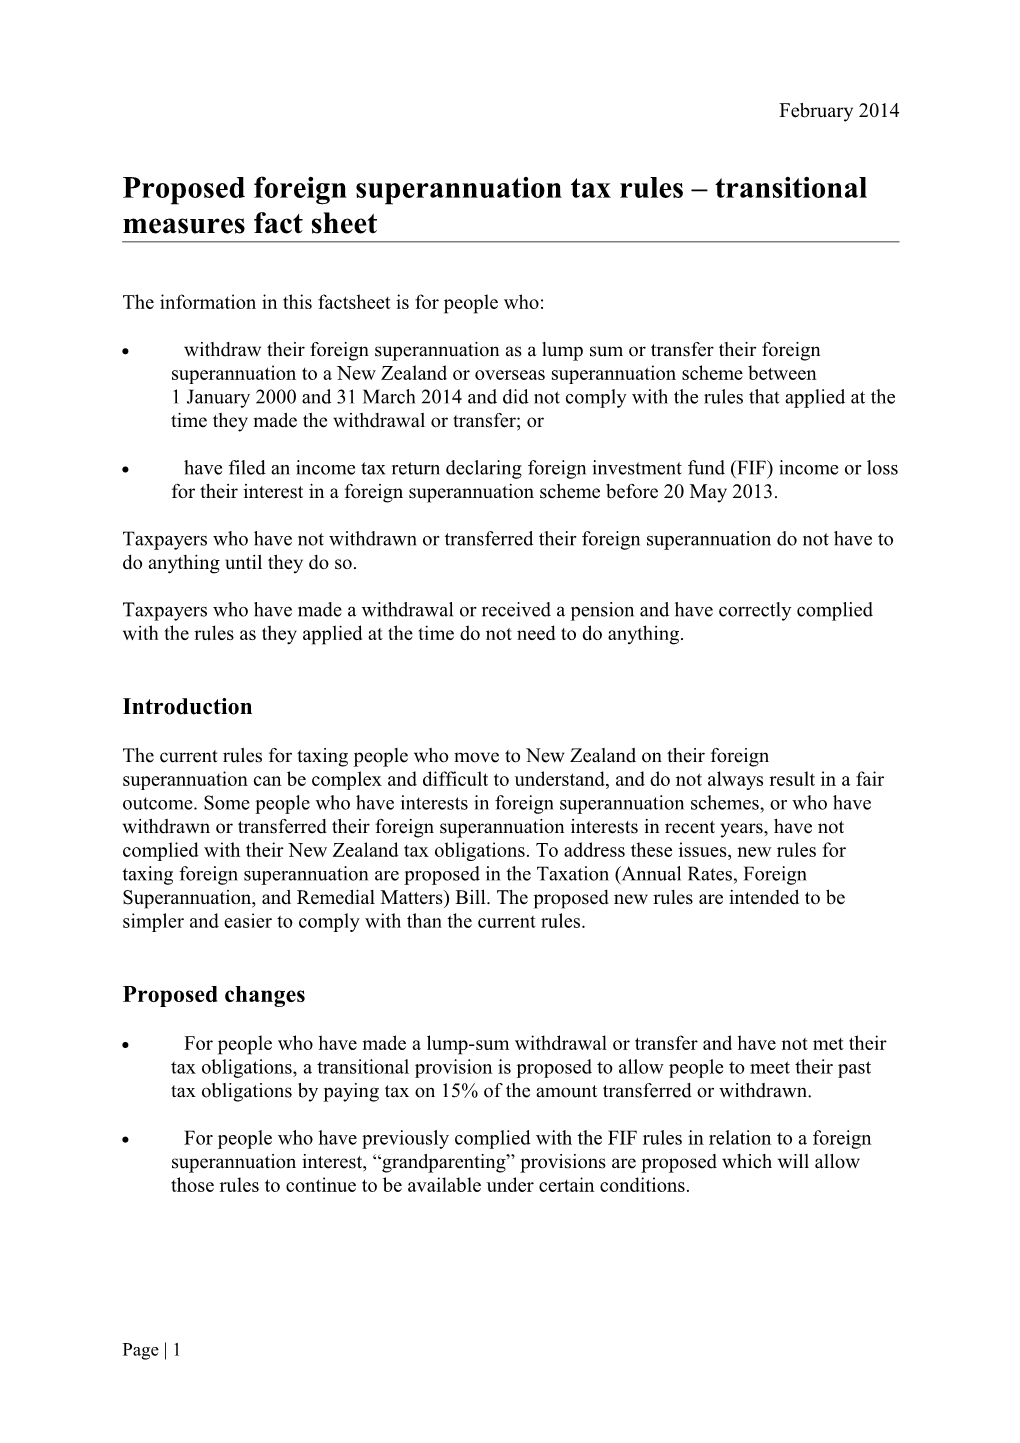 Proposed Foreign Superannuation Tax Rules - Transitional Measures Fact Sheet